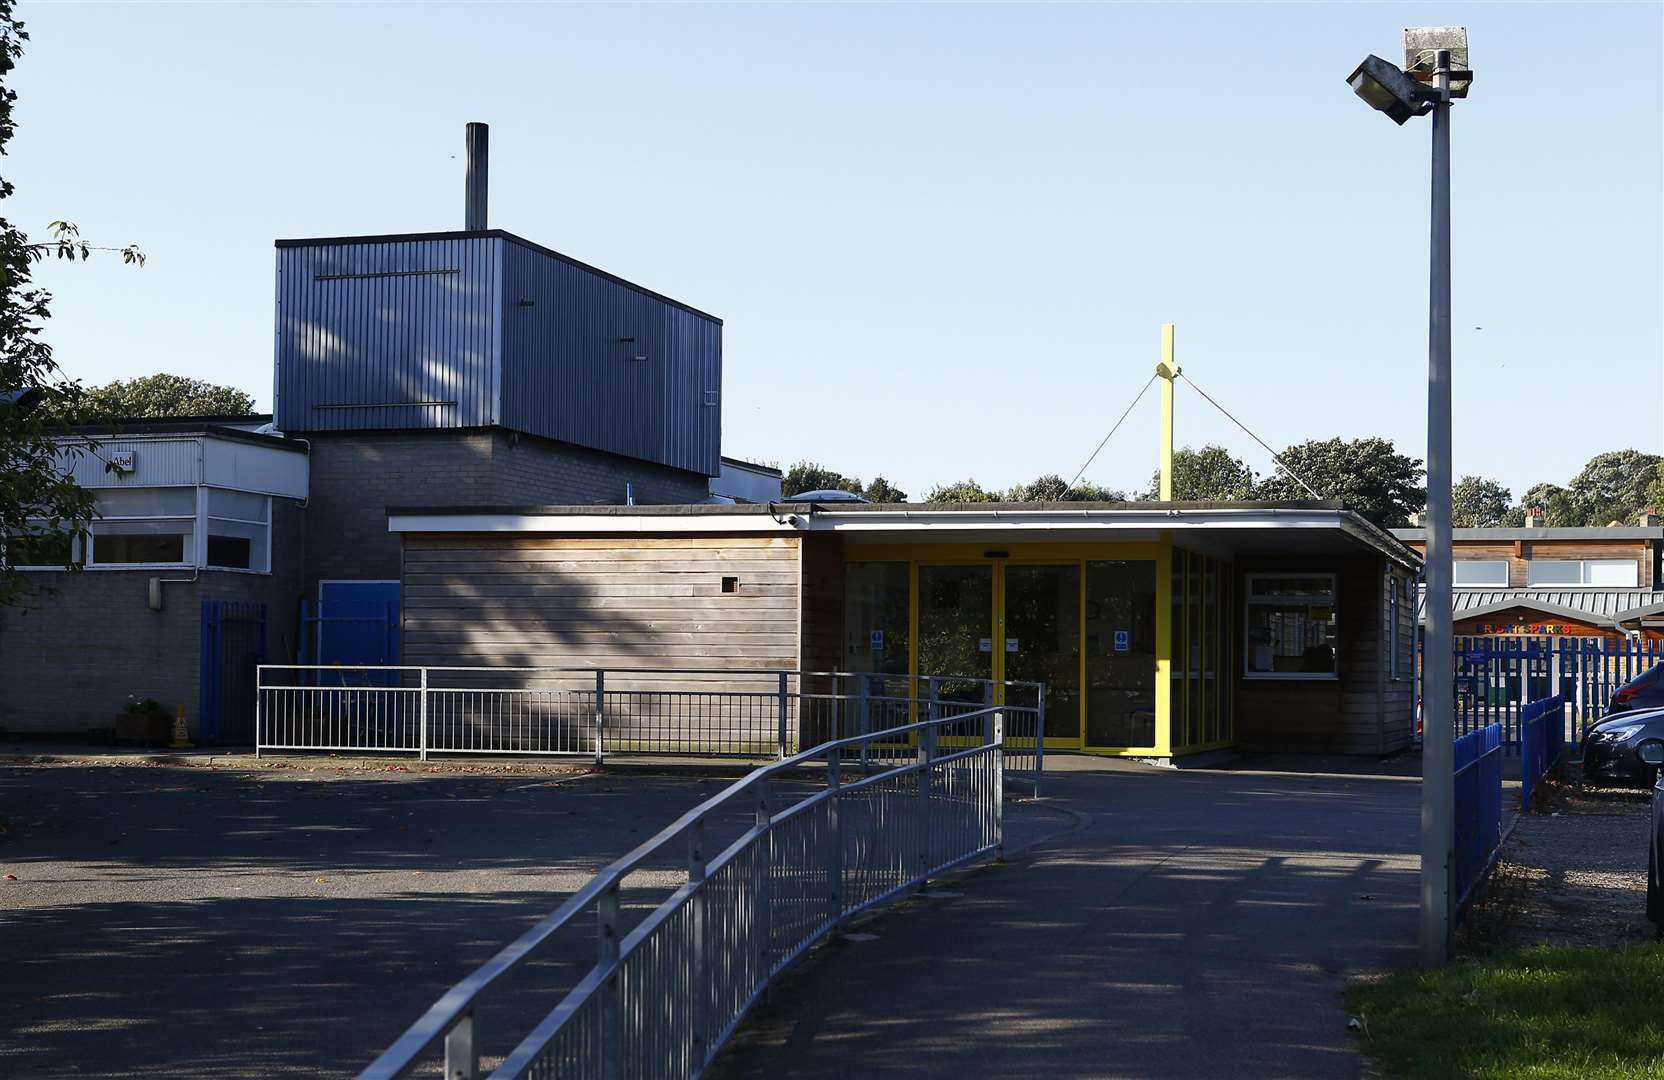 Warden House is the largest primary school in Deal according to Ofsted pupil numbers Picture: Matt Bristow